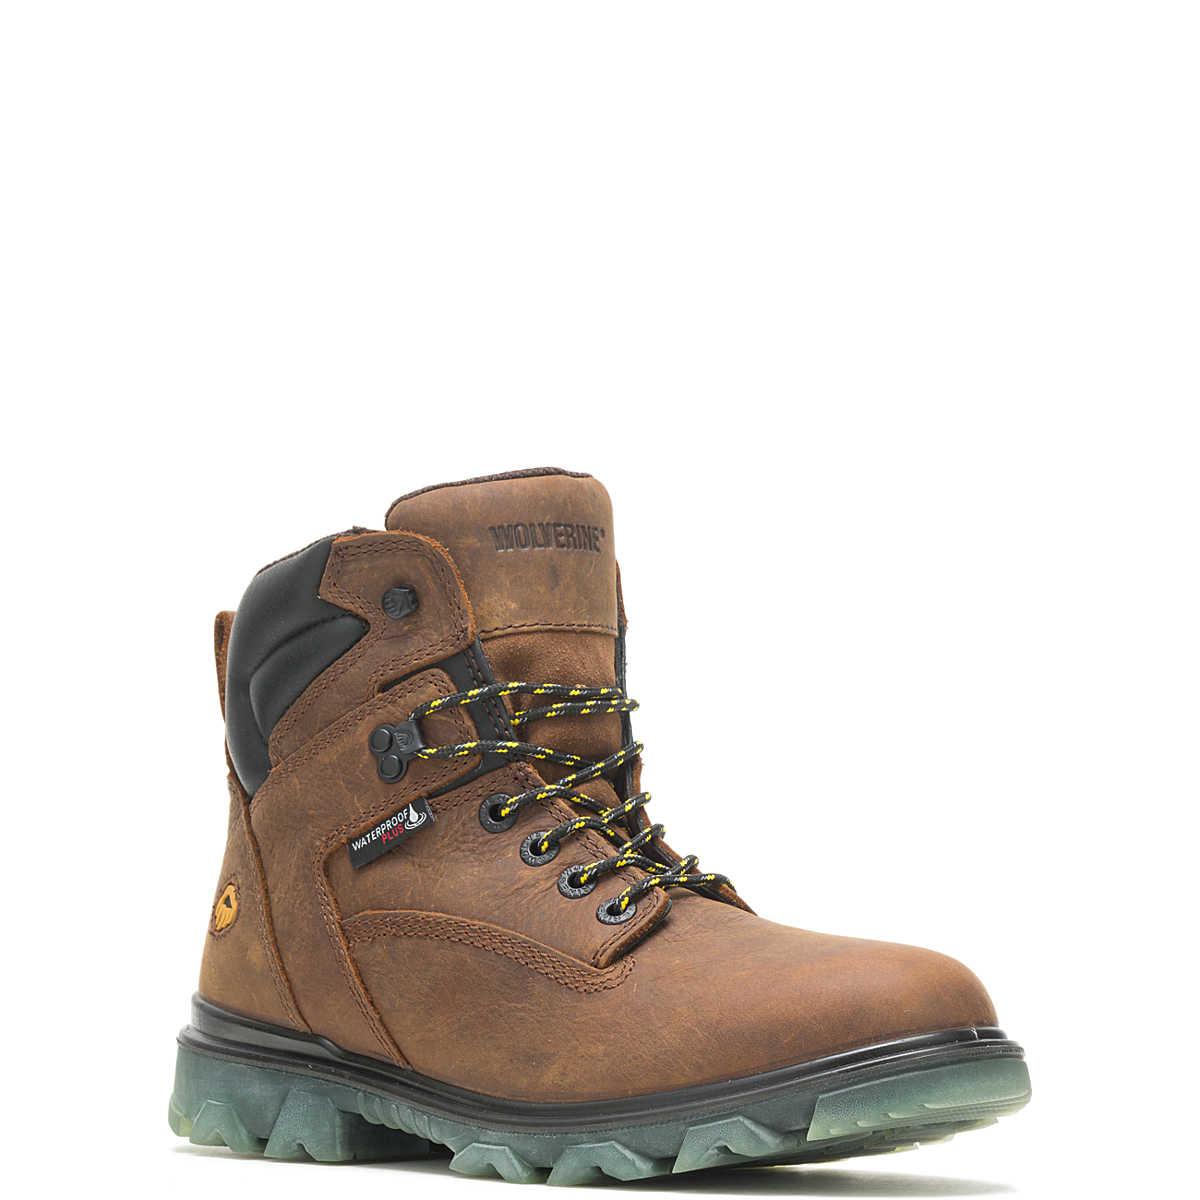 Men's I-90 EPX Carbonmax Work Boot - Brown